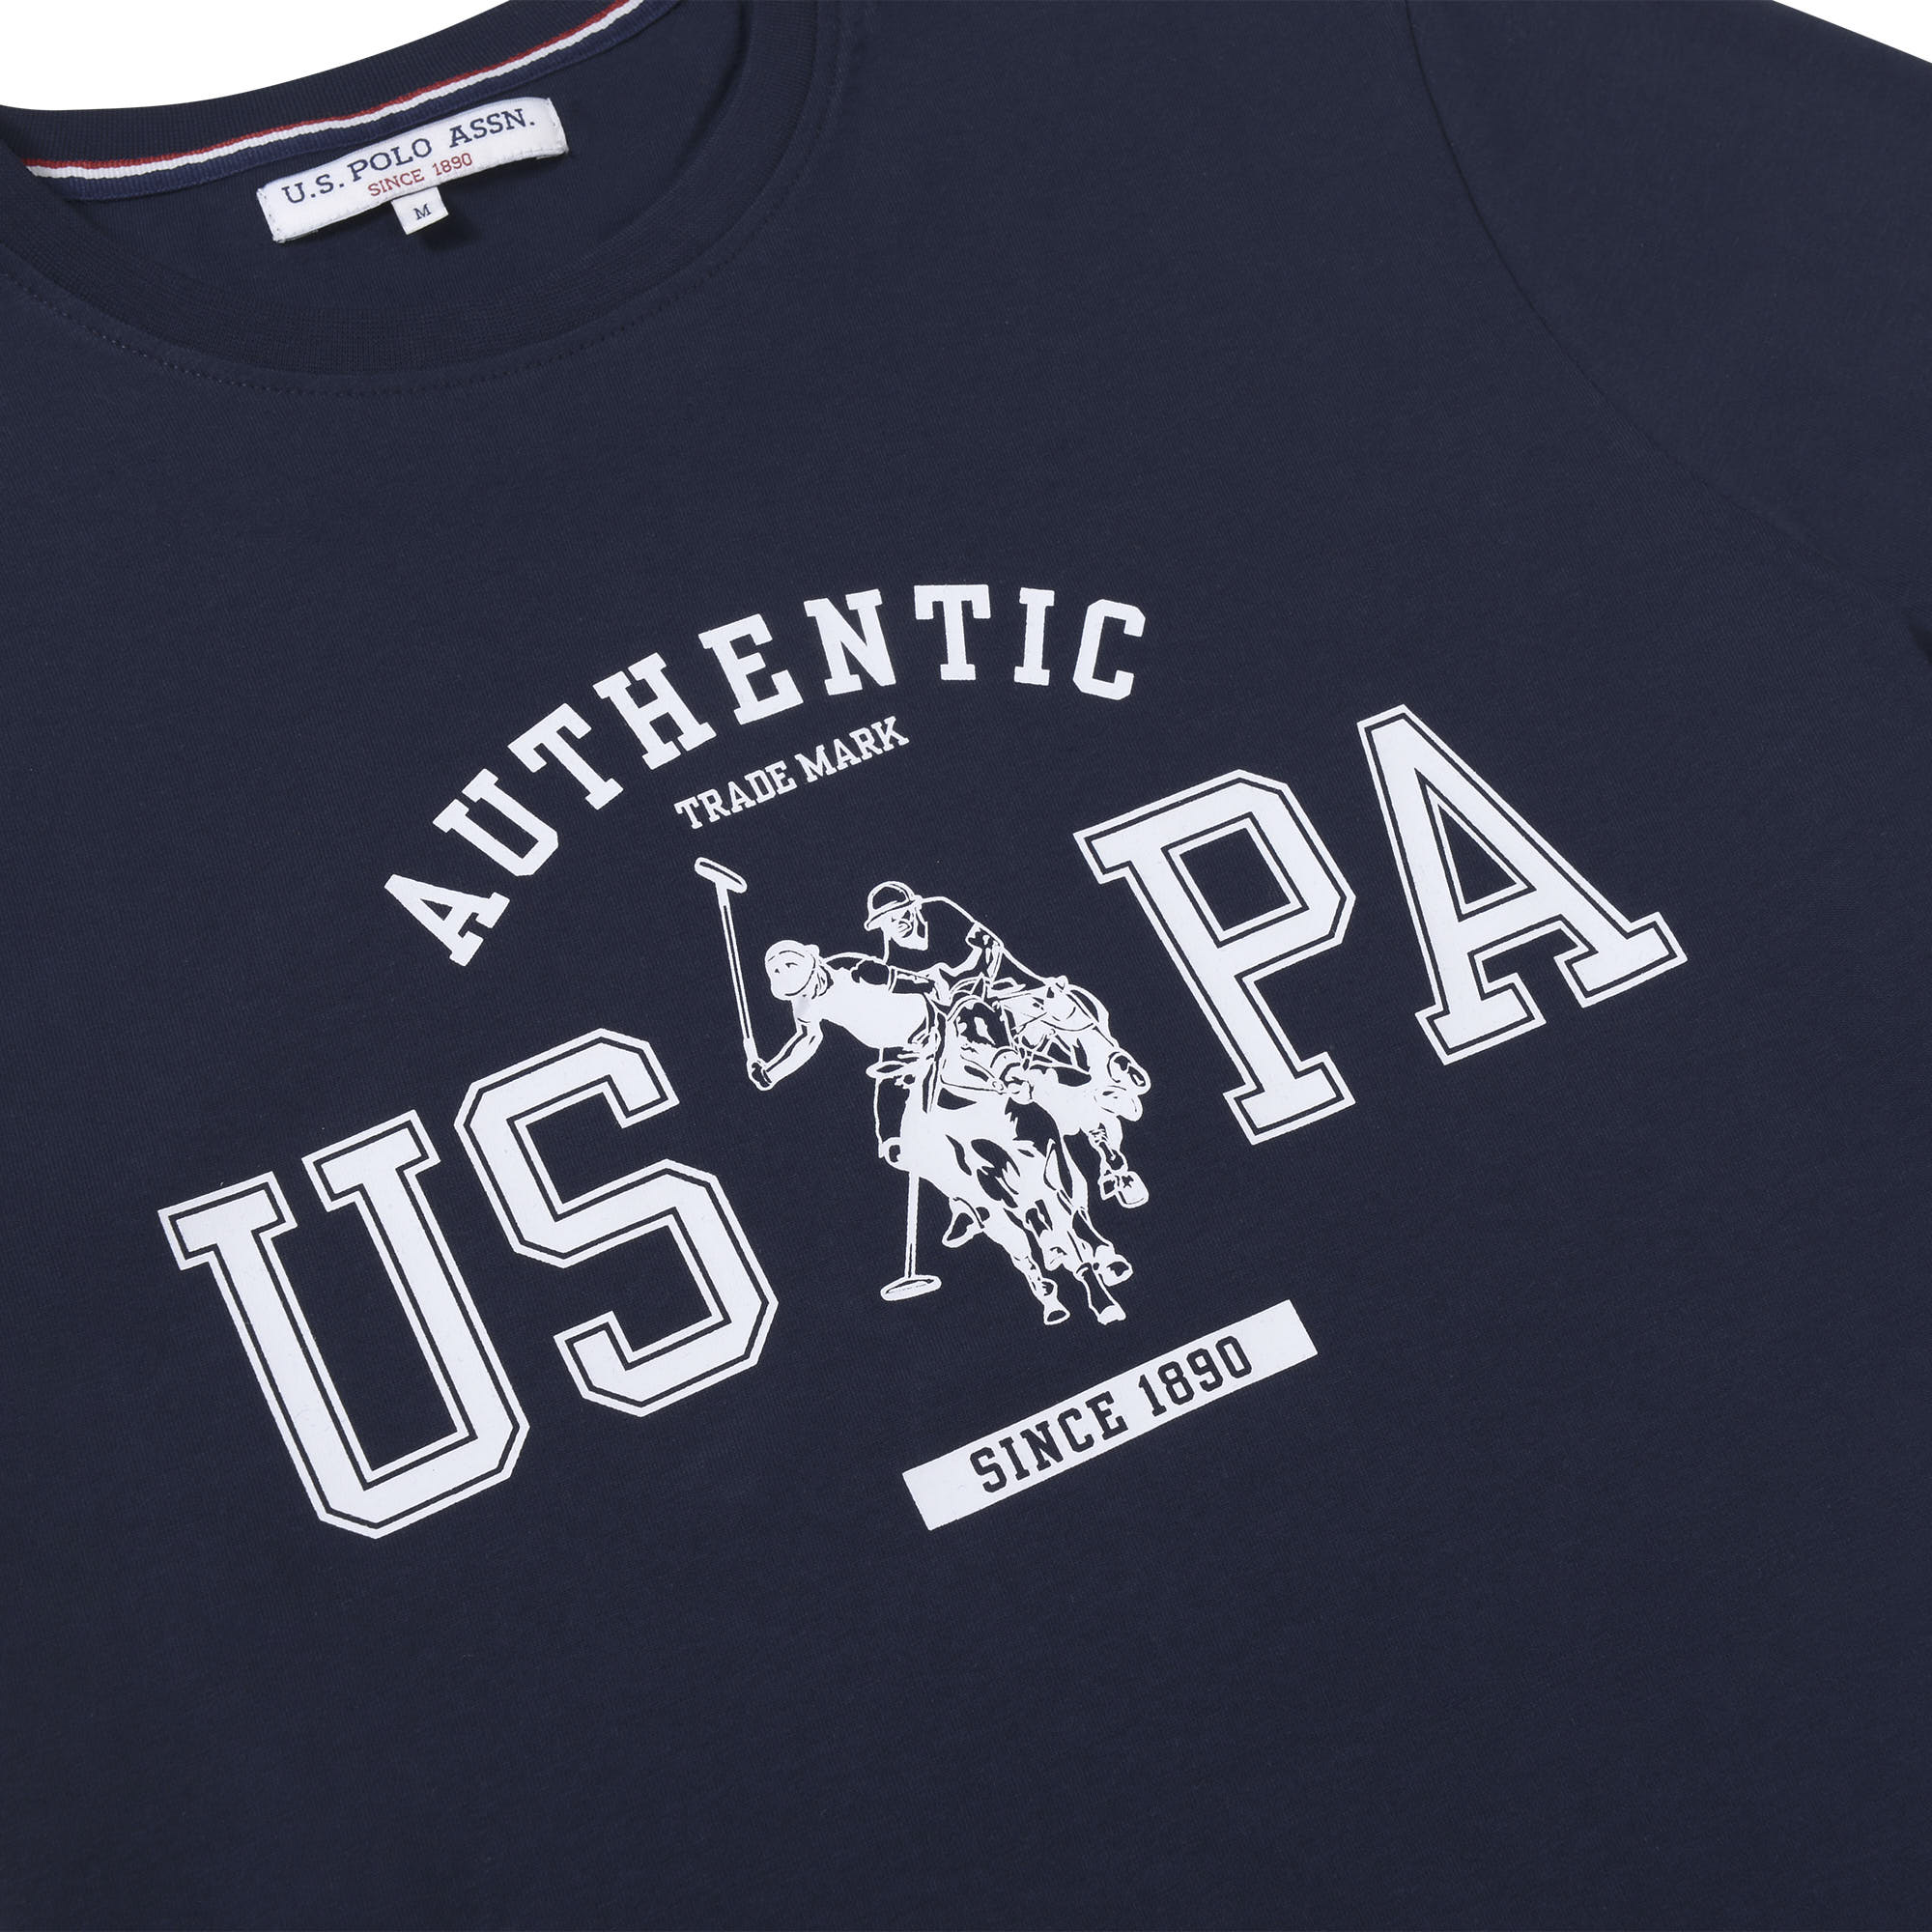 Mens Authentic USPA Graphic T-Shirt in Navy Blue